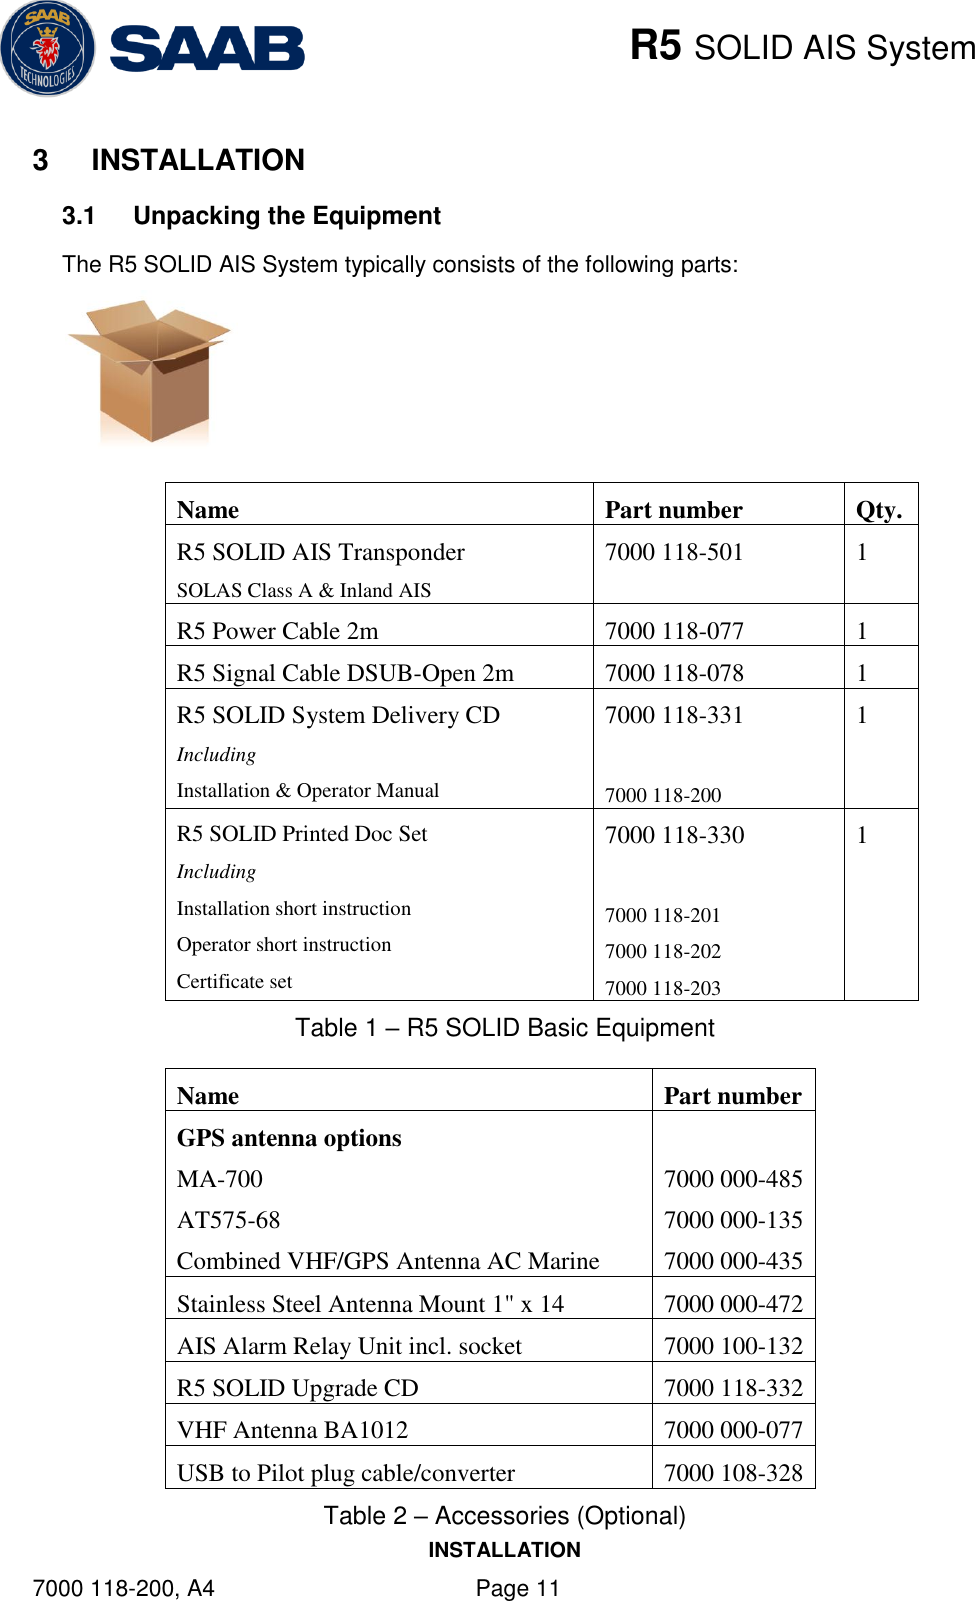    R5 SOLID AIS System INSTALLATION 7000 118-200, A4    Page 11 3  INSTALLATION 3.1  Unpacking the Equipment The R5 SOLID AIS System typically consists of the following parts:  Name Part number Qty. R5 SOLID AIS Transponder SOLAS Class A &amp; Inland AIS 7000 118-501 1 R5 Power Cable 2m 7000 118-077 1 R5 Signal Cable DSUB-Open 2m 7000 118-078 1 R5 SOLID System Delivery CD Including Installation &amp; Operator Manual 7000 118-331  7000 118-200 1 R5 SOLID Printed Doc Set Including Installation short instruction Operator short instruction Certificate set 7000 118-330  7000 118-201 7000 118-202 7000 118-203 1 Table 1 – R5 SOLID Basic Equipment Name Part number GPS antenna options MA-700  AT575-68  Combined VHF/GPS Antenna AC Marine  7000 000-485 7000 000-135 7000 000-435 Stainless Steel Antenna Mount 1&quot; x 14 7000 000-472 AIS Alarm Relay Unit incl. socket 7000 100-132 R5 SOLID Upgrade CD 7000 118-332 VHF Antenna BA1012 7000 000-077 USB to Pilot plug cable/converter 7000 108-328 Table 2 – Accessories (Optional) 